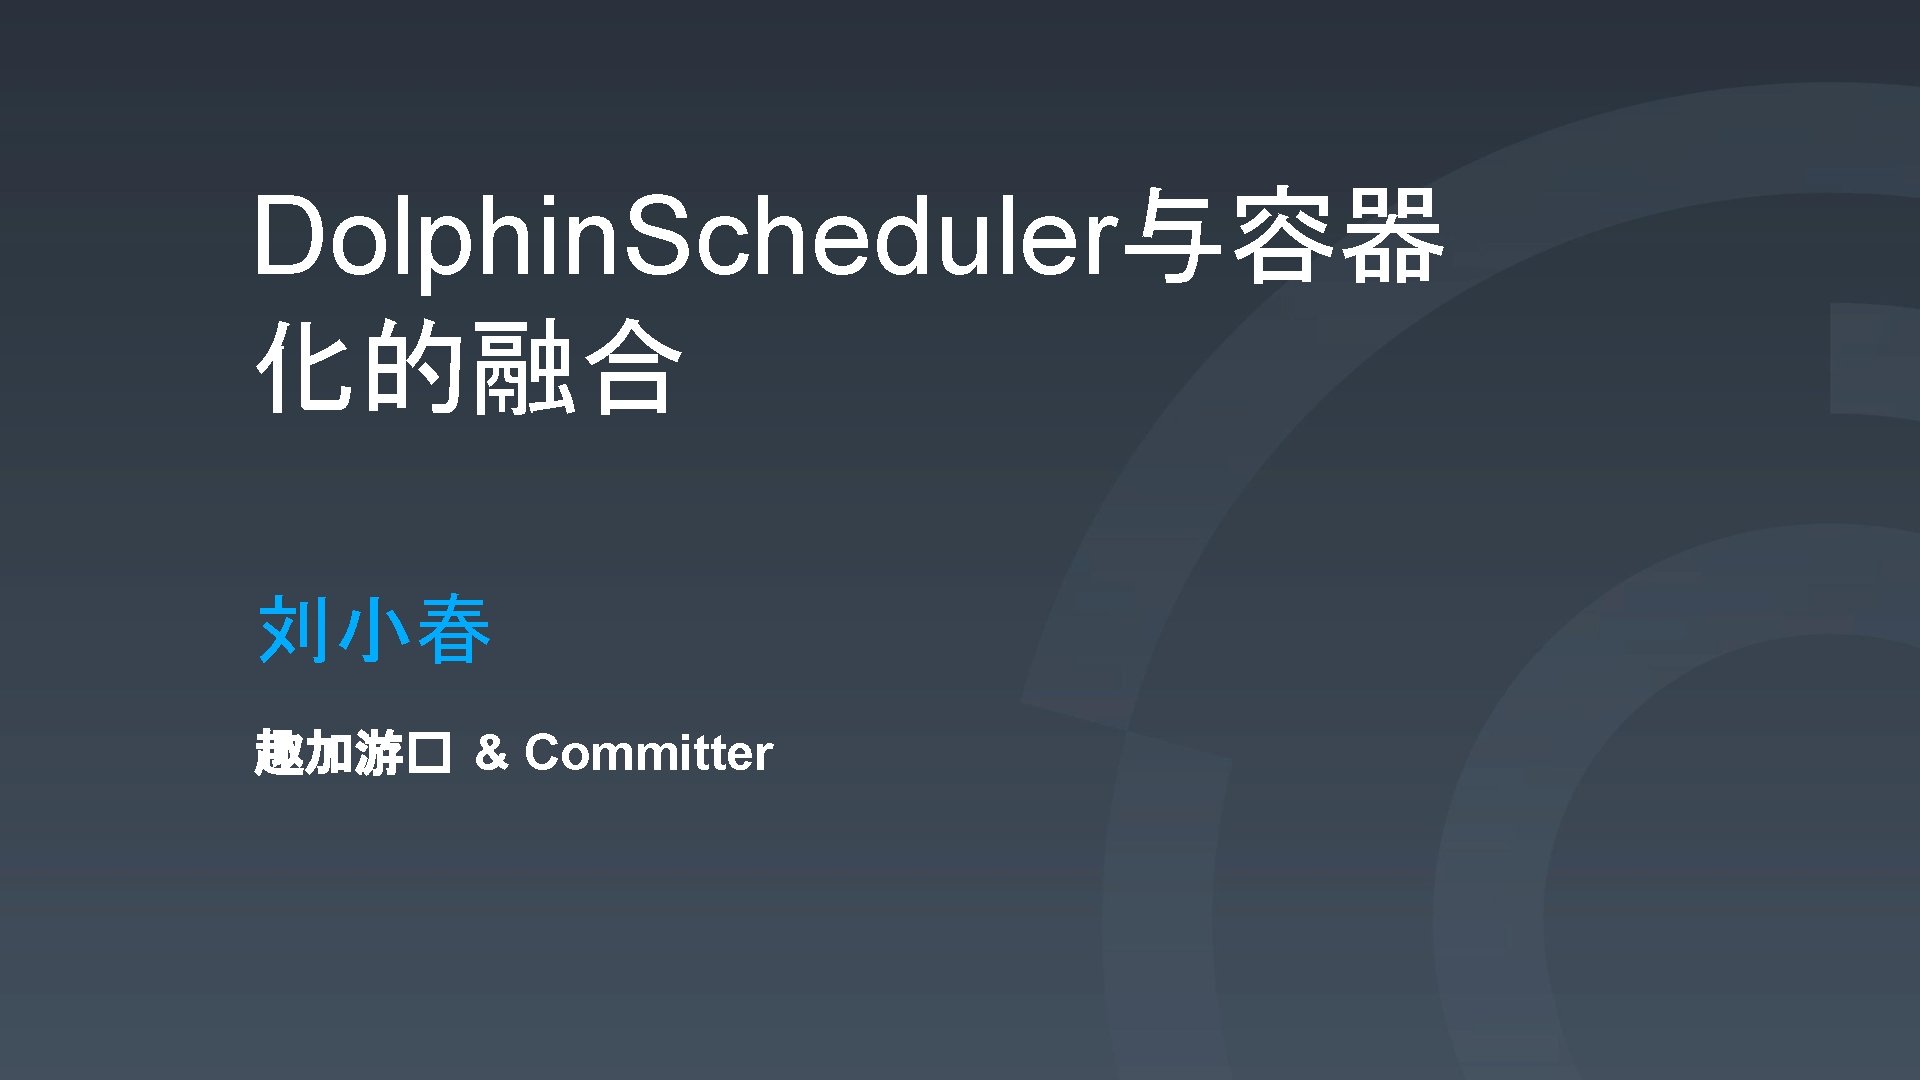 Dolphin. Scheduler与容器 化的融合 刘小春 趣加游� & Committer 